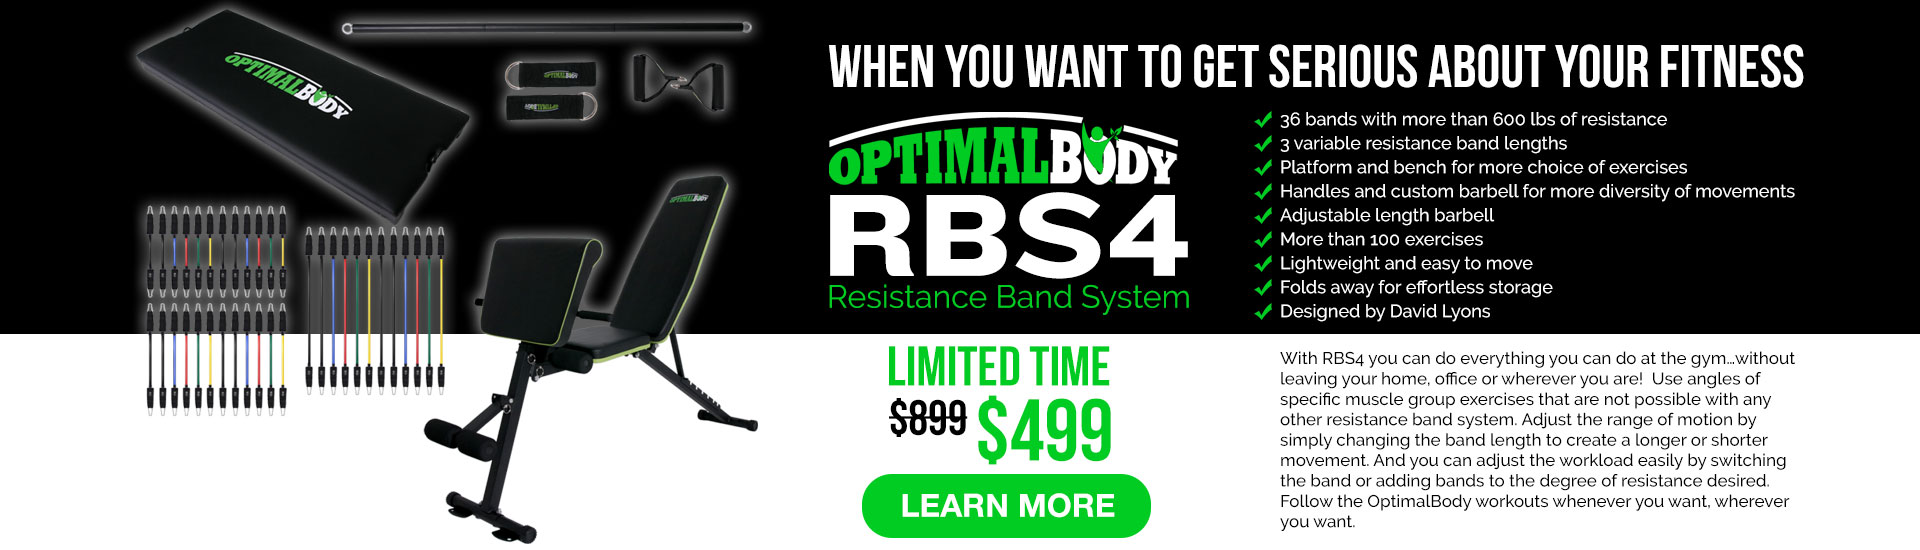 Buy the OptimalBody RBS4 resistance band system